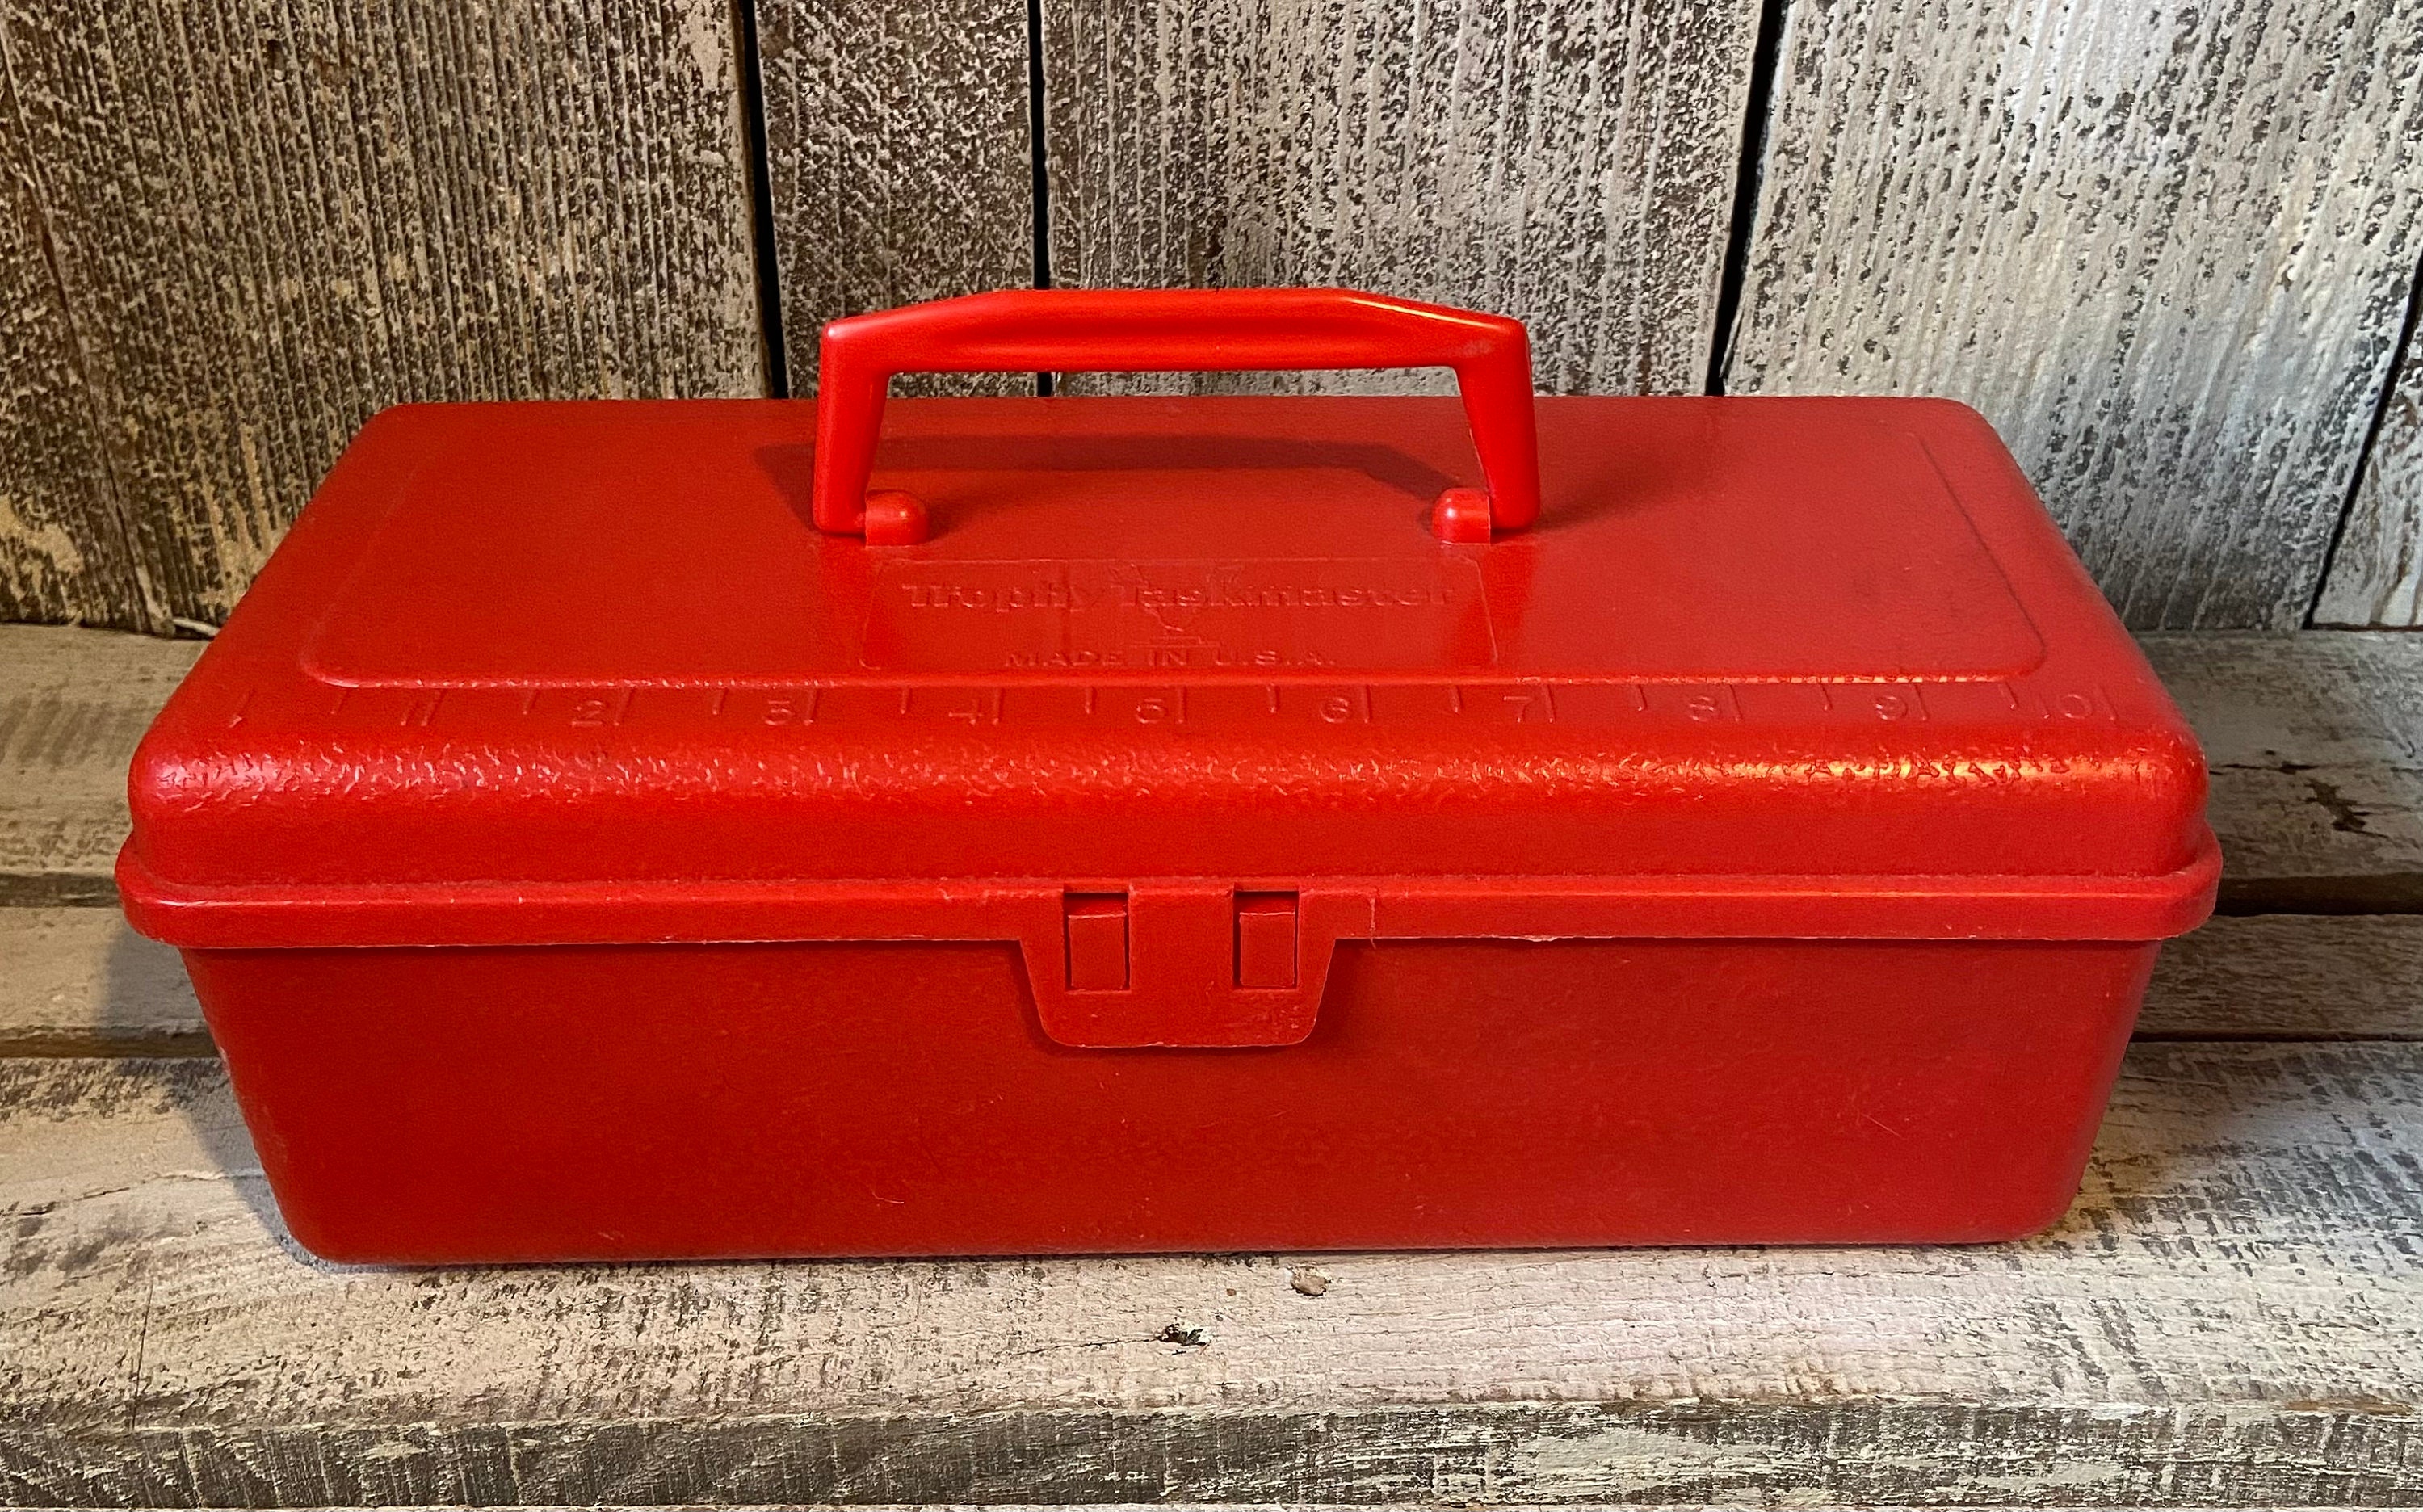 Vintage Red Plastic Fishing Tackle Box or Tool Box With Removable Tray, Red  Trophy Task Master Box 